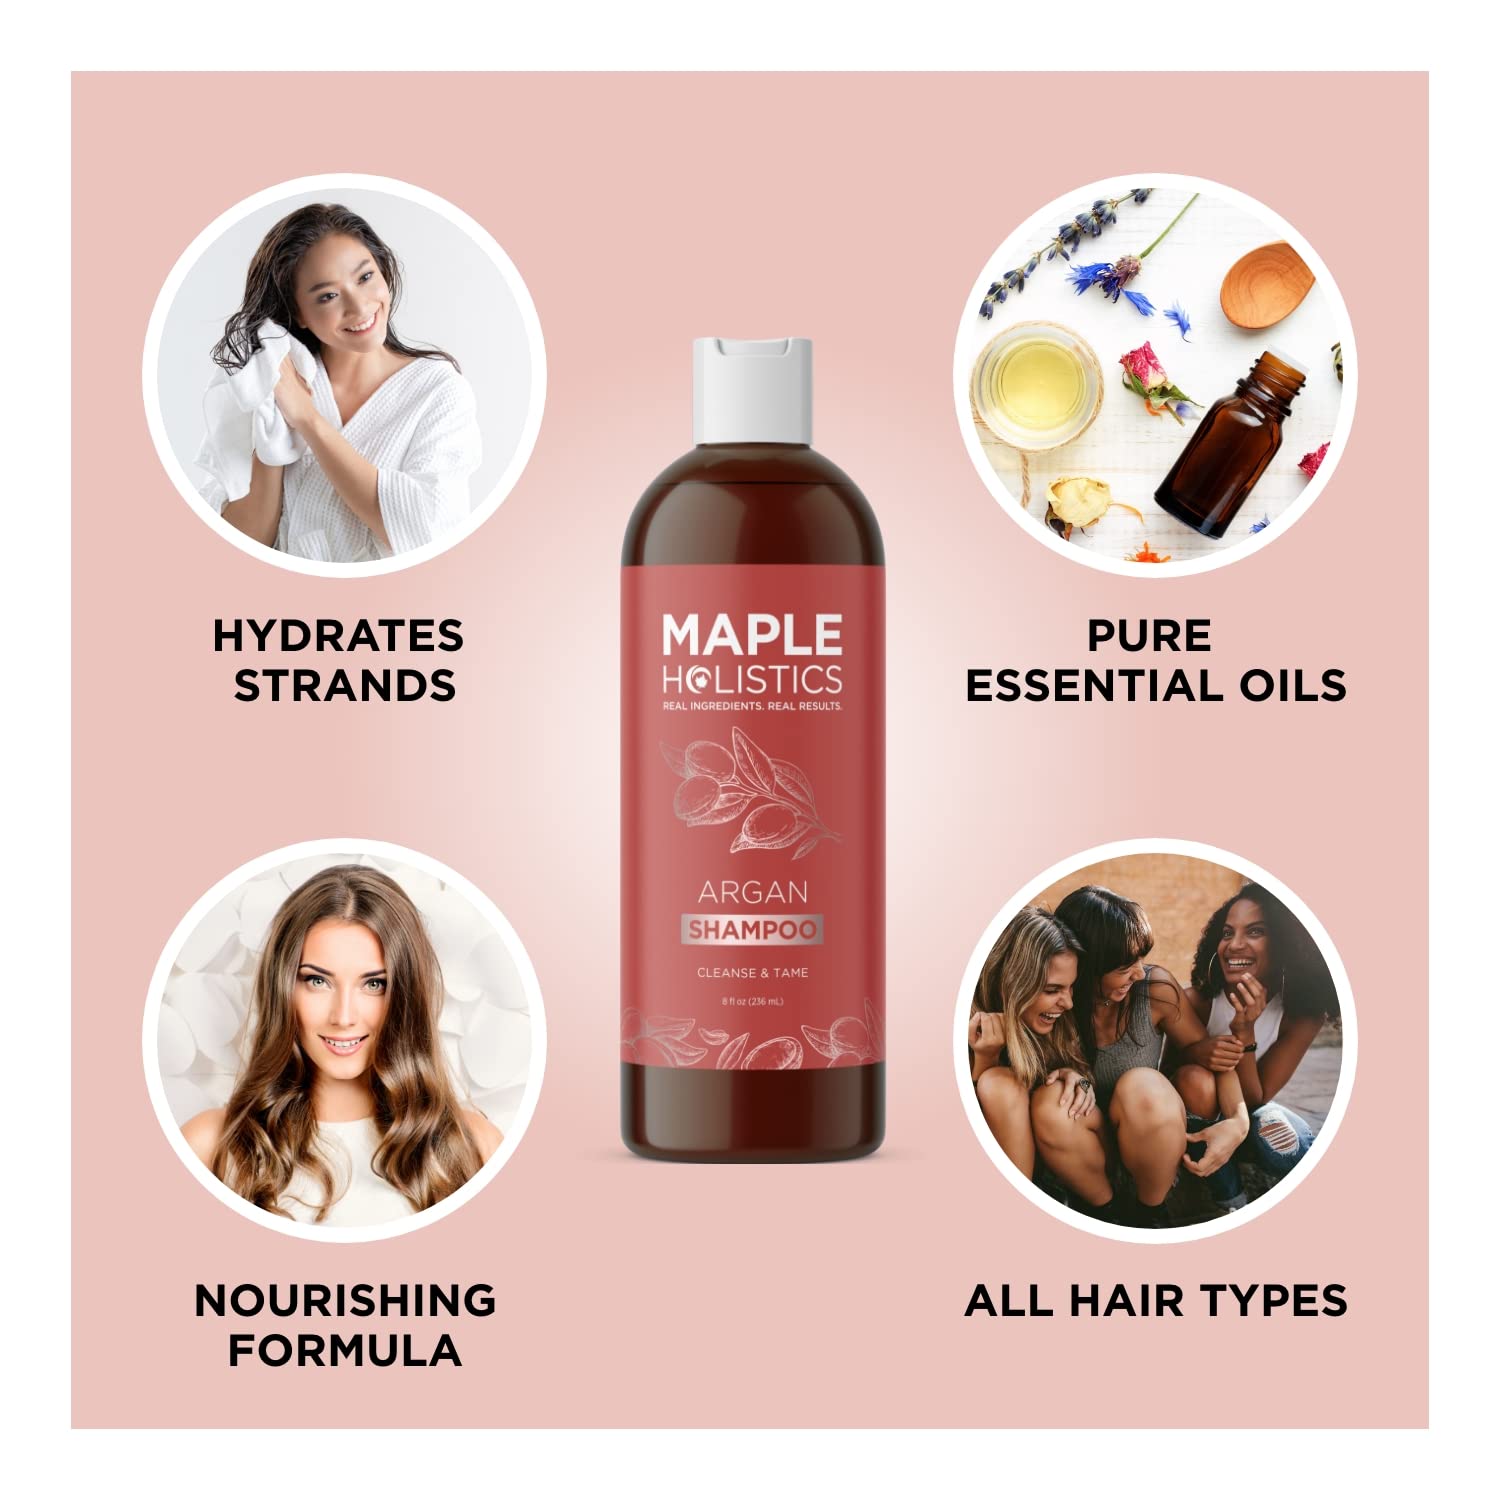 Argan Oil Shampoo for Dry Hair - Sulfate Free Shampoo for Damaged Hair and Frizz with Argan Oil for Hair - Volumizing Shampoo for Hair Shine and Volume Featuring Ultra Moisturizing Natural Oils